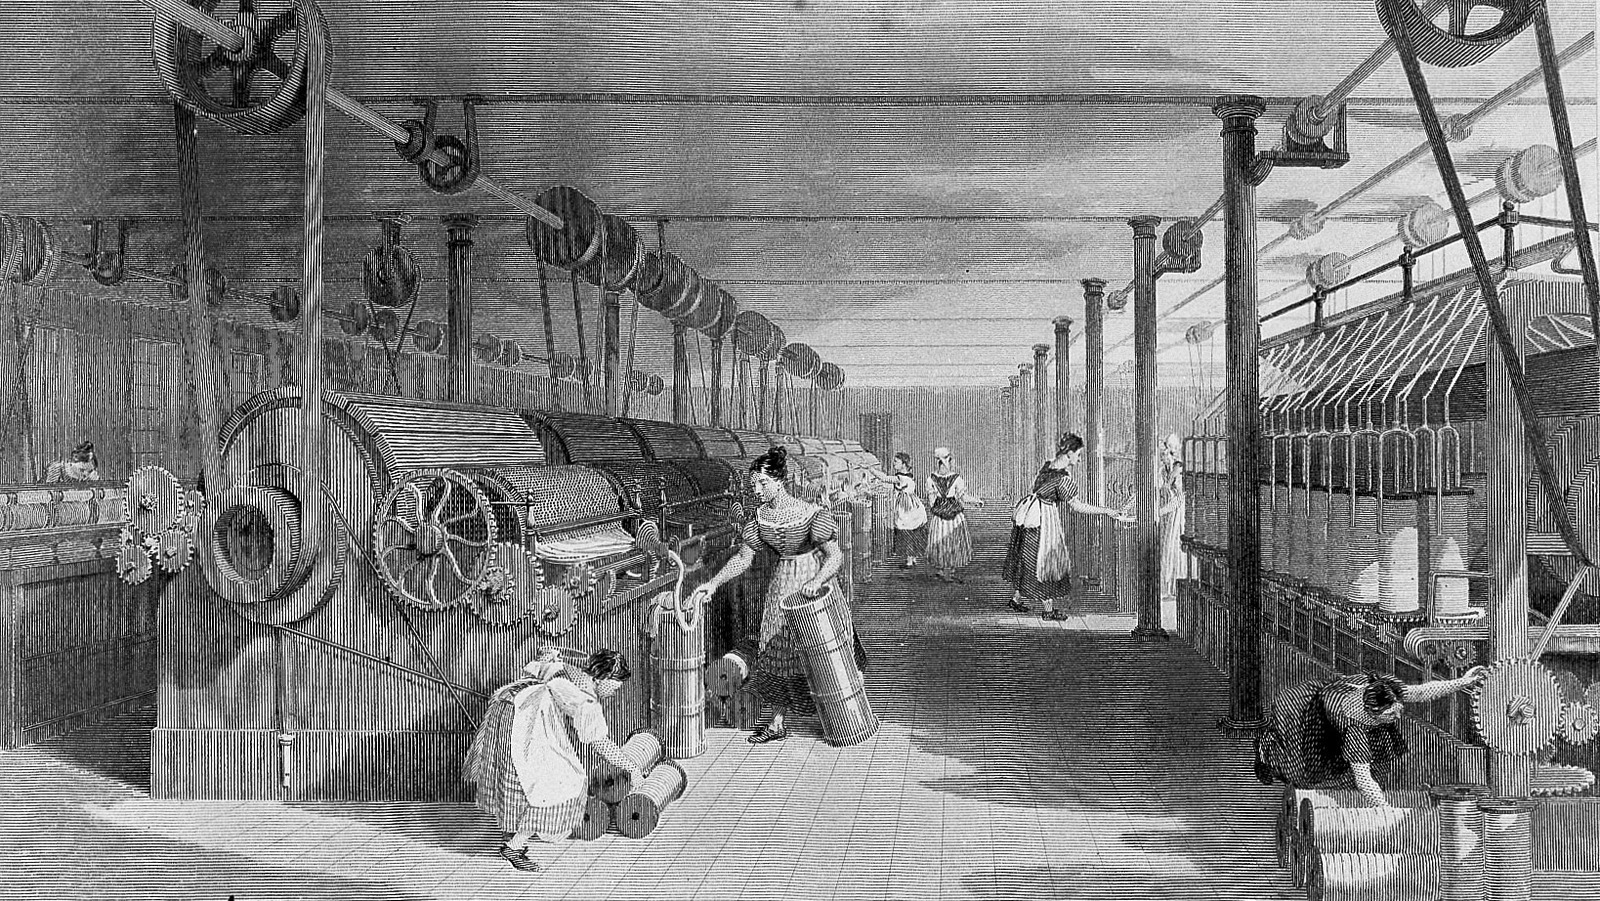 Conditions In Factories In The Industrial Revolution